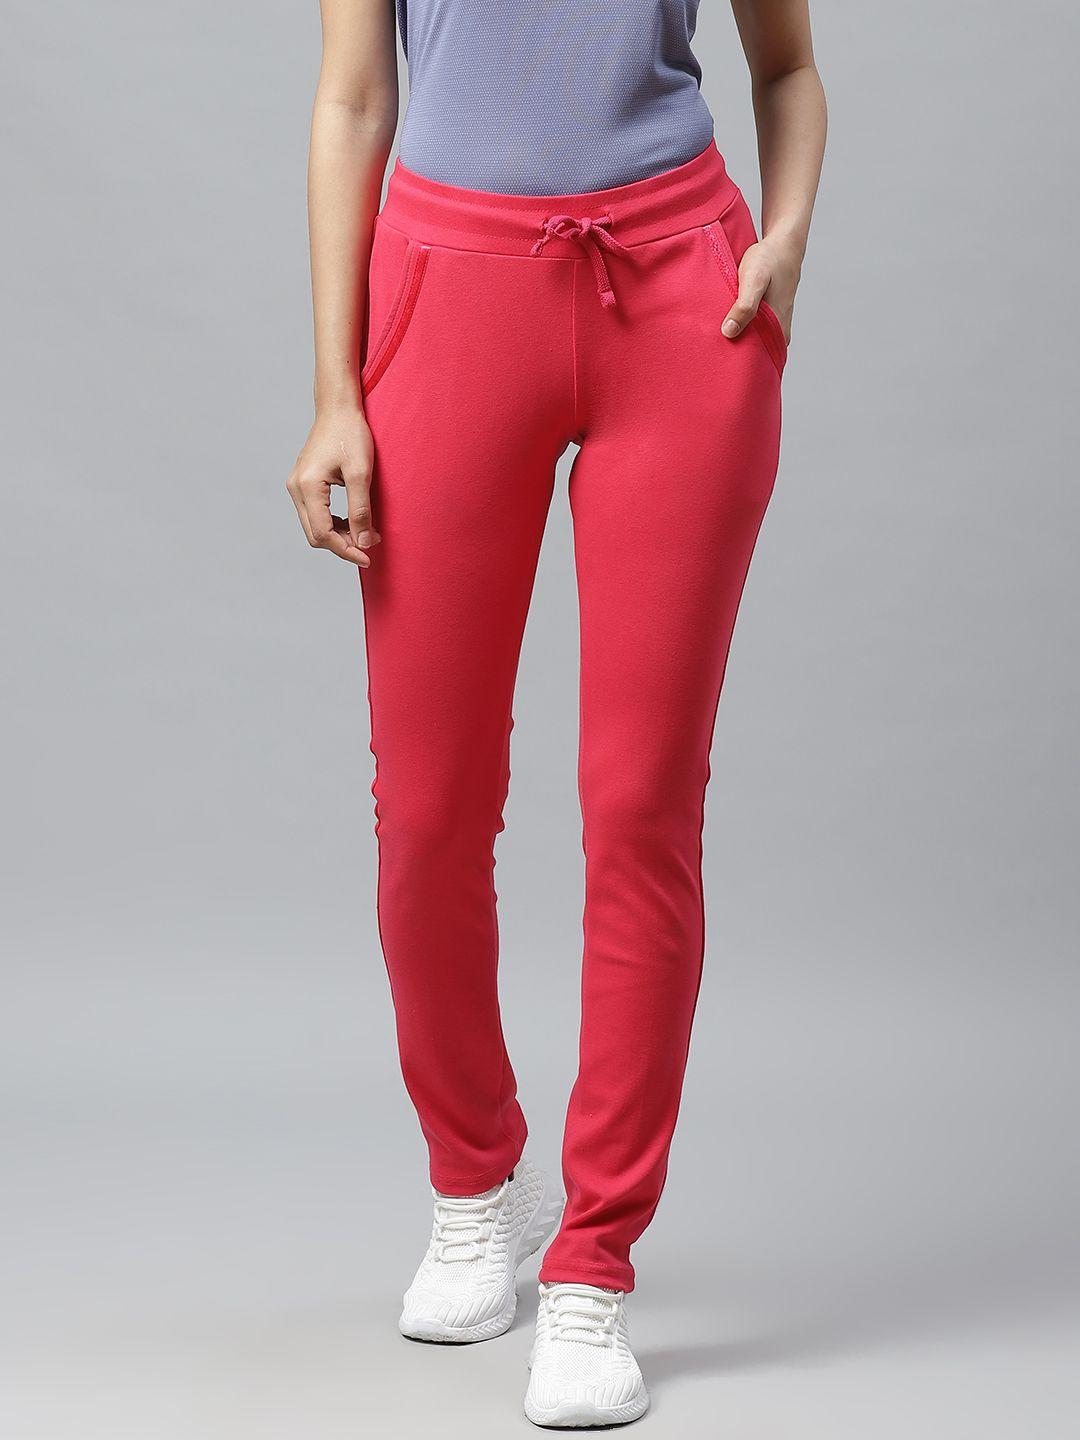 cayman women pink solid track pants